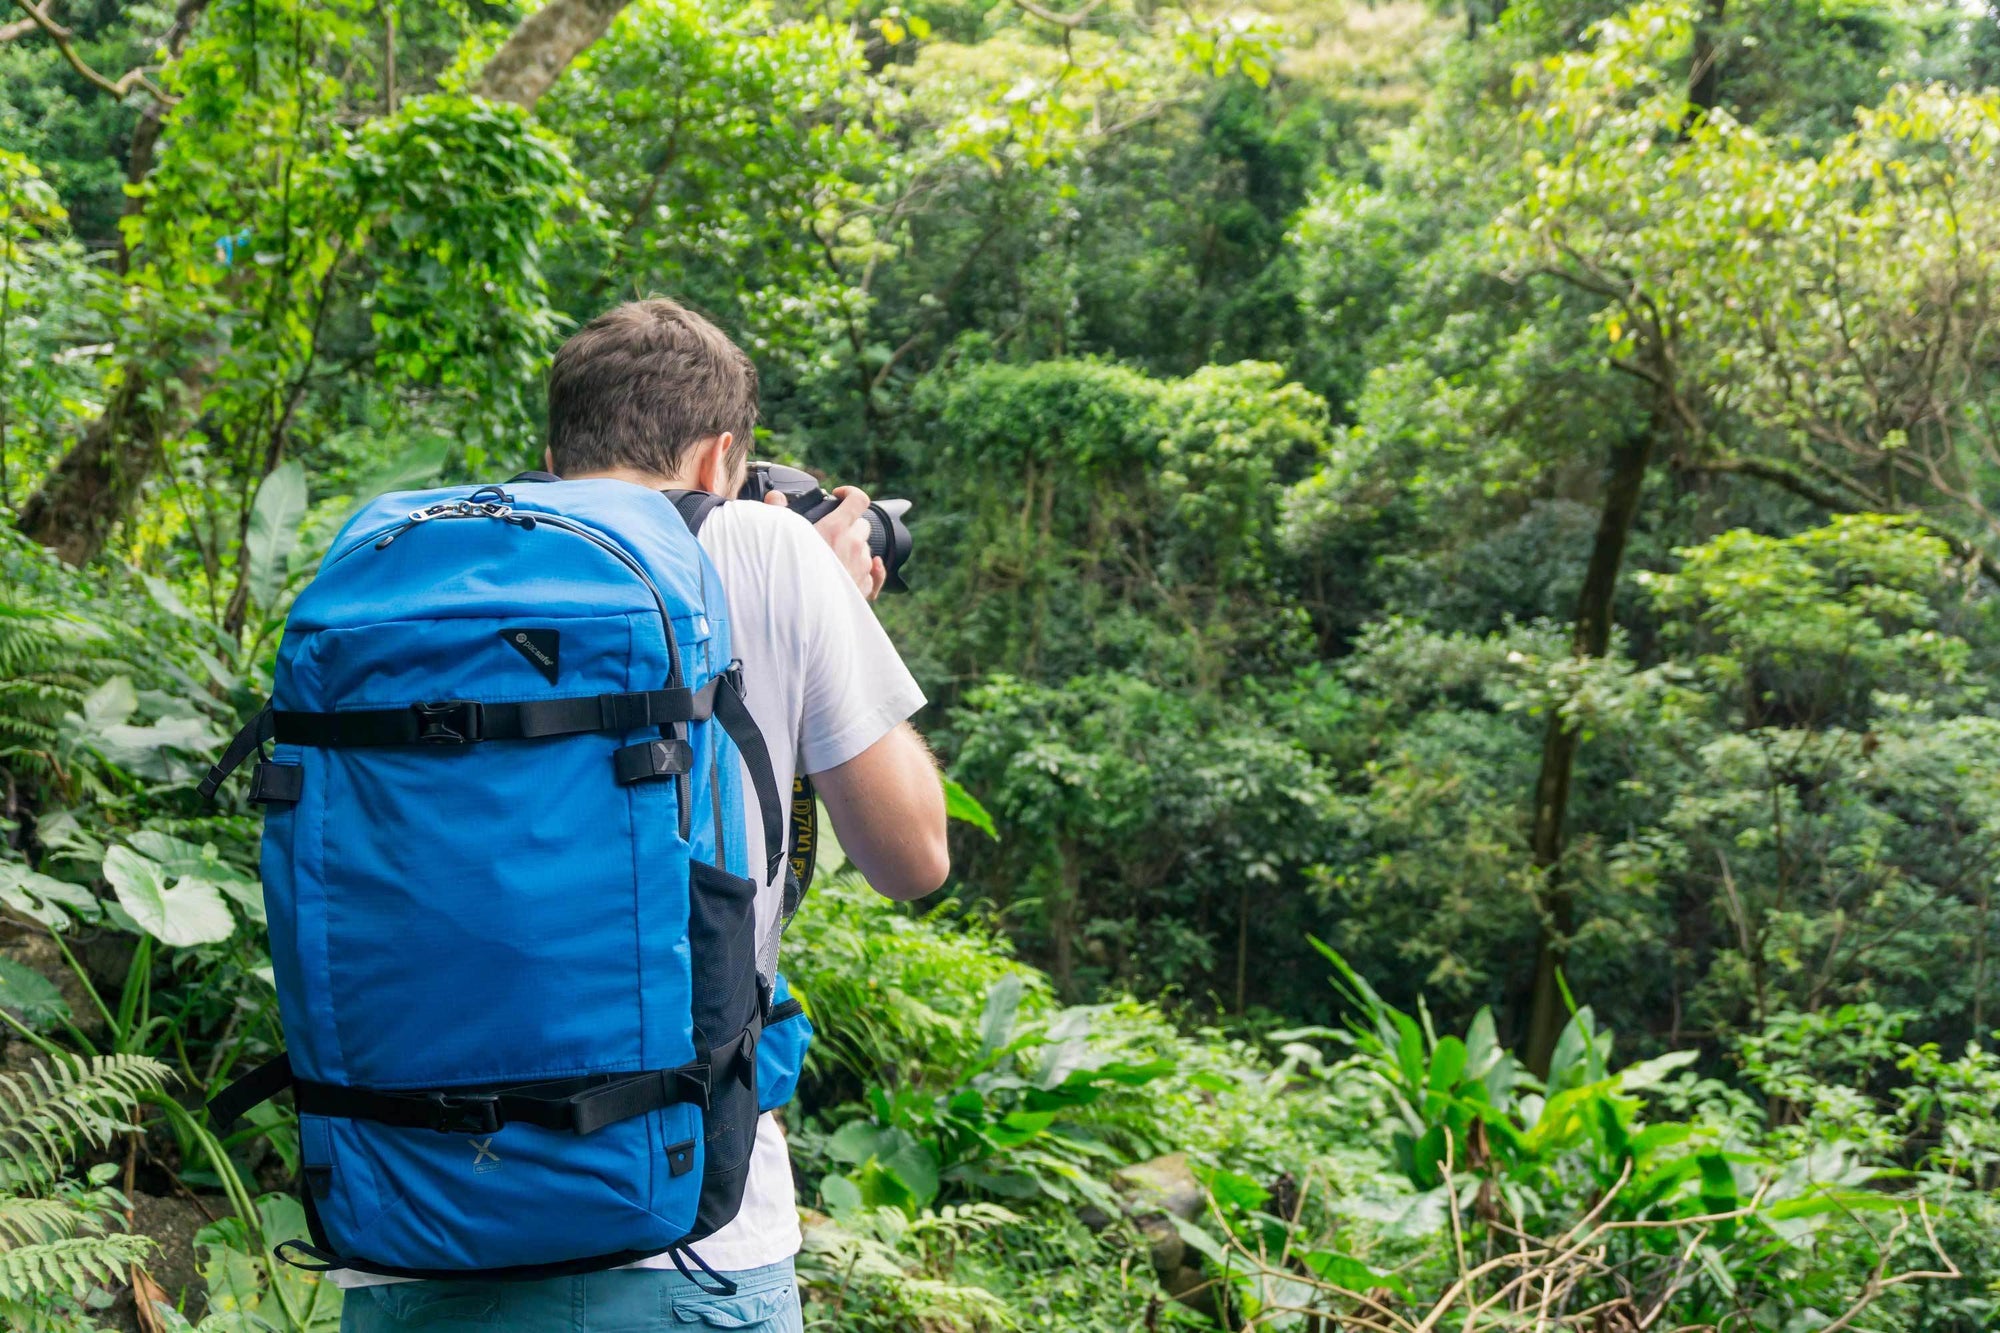 How to safely pack your camera gear in a backpack in 3 easy steps